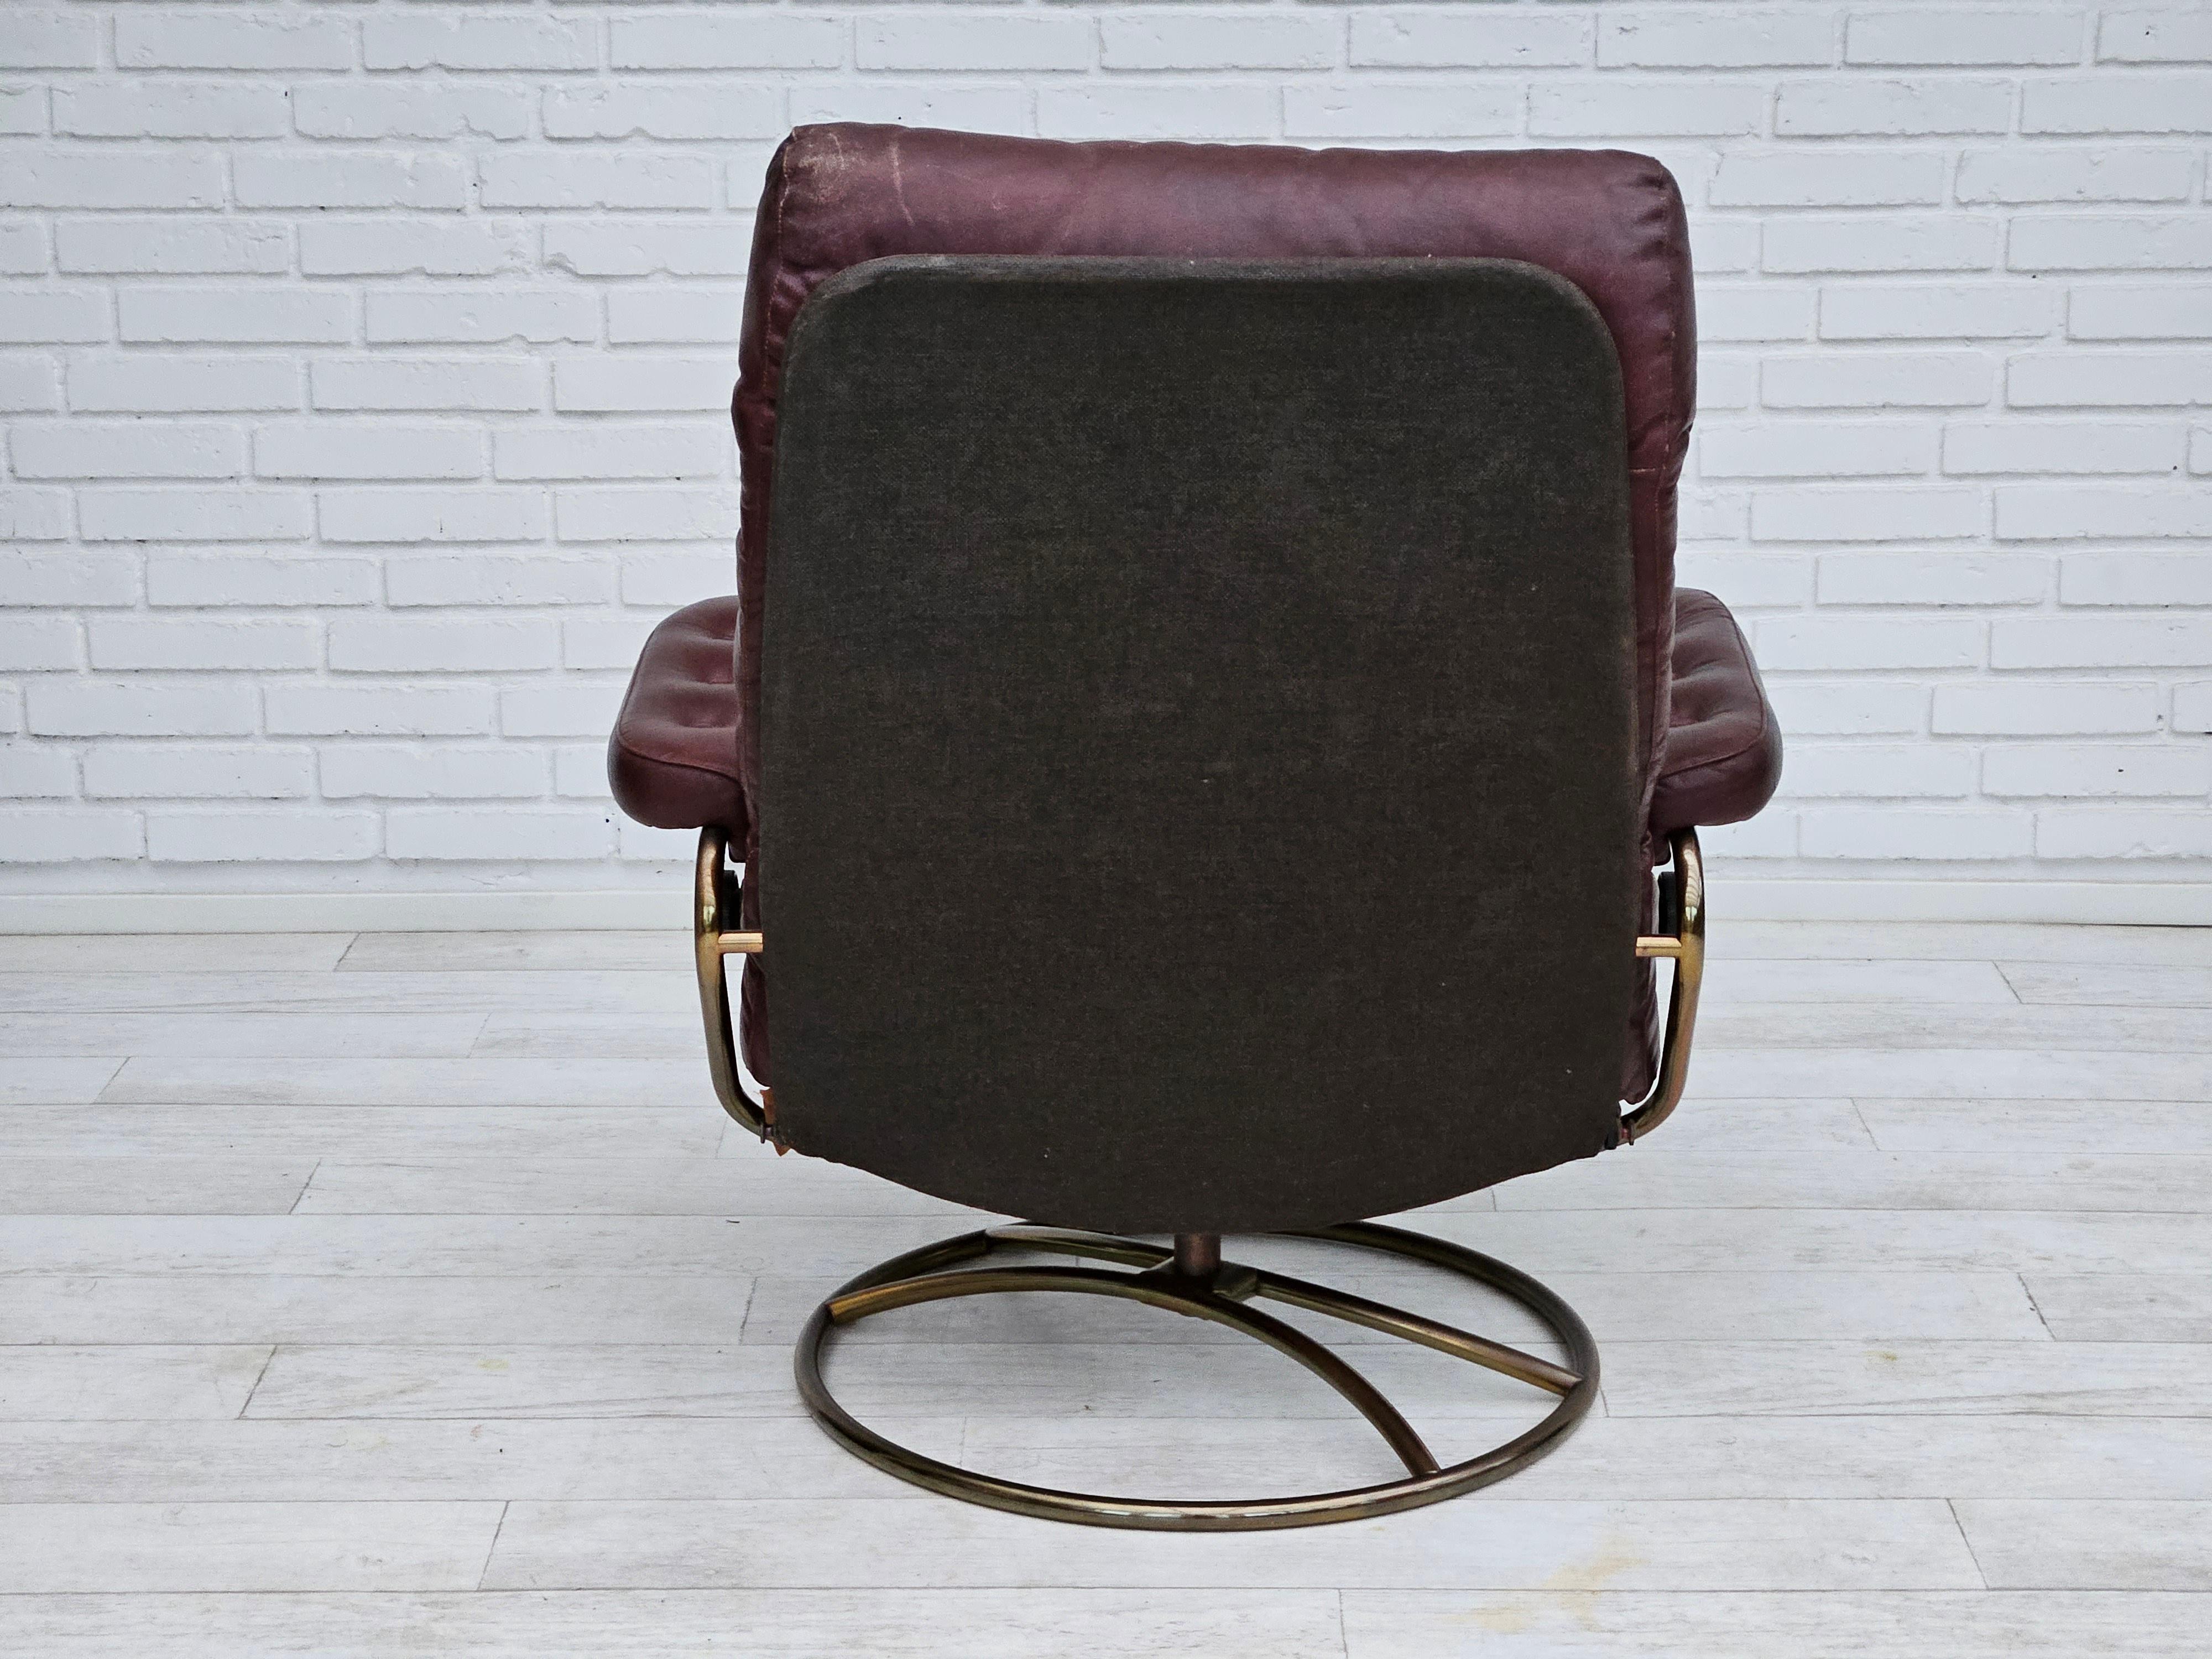 1970s, Norwegian relax swivel chair by Stressless, original very good condition. 7